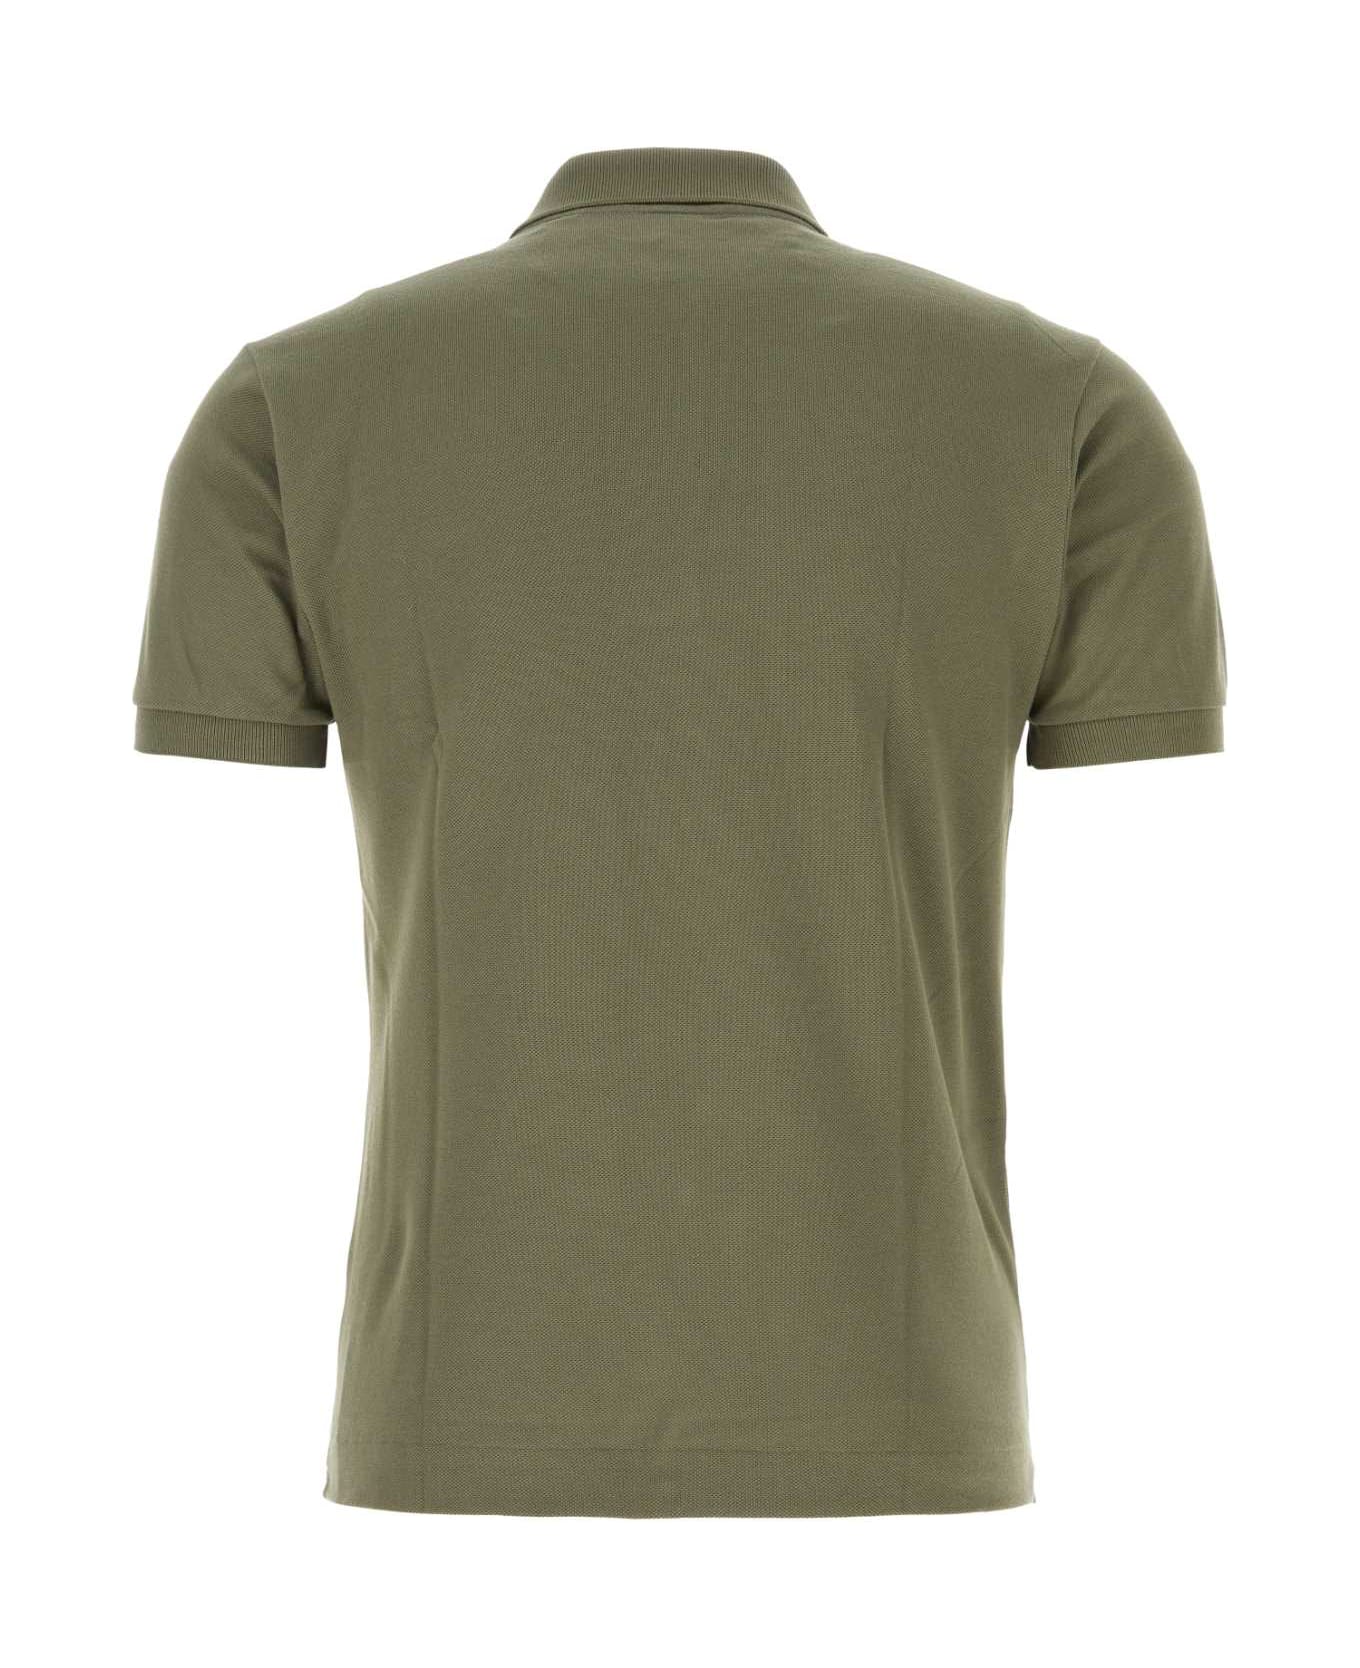 Lacoste Army Green Piquet Polo Shirt - 316 ポロシャツ